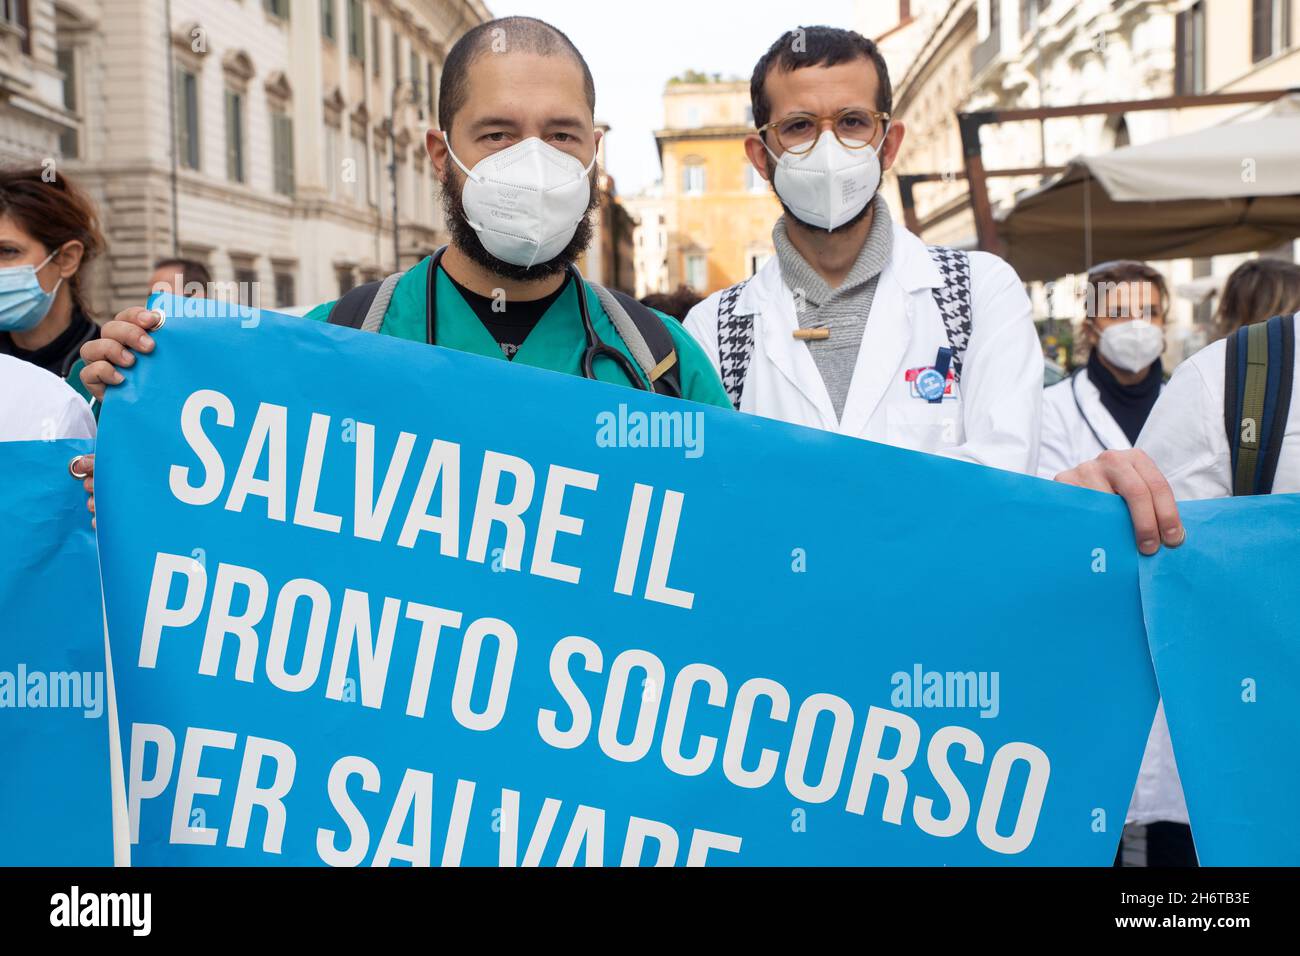 Rome, Italy. 17th Nov, 2021. Flashmob in Piazza Santi Apostoli organized by SIMEU (Italian Society of Emergency Urgency), which gathers nurses and doctors from Emergency Department and 118 to protest against organizational, structural and organizational deficiencies of Emergency Department, Emergency Medicine and 118 throughout Italy. (Credit Image: © Matteo Nardone/Pacific Press via ZUMA Press Wire) Stock Photo